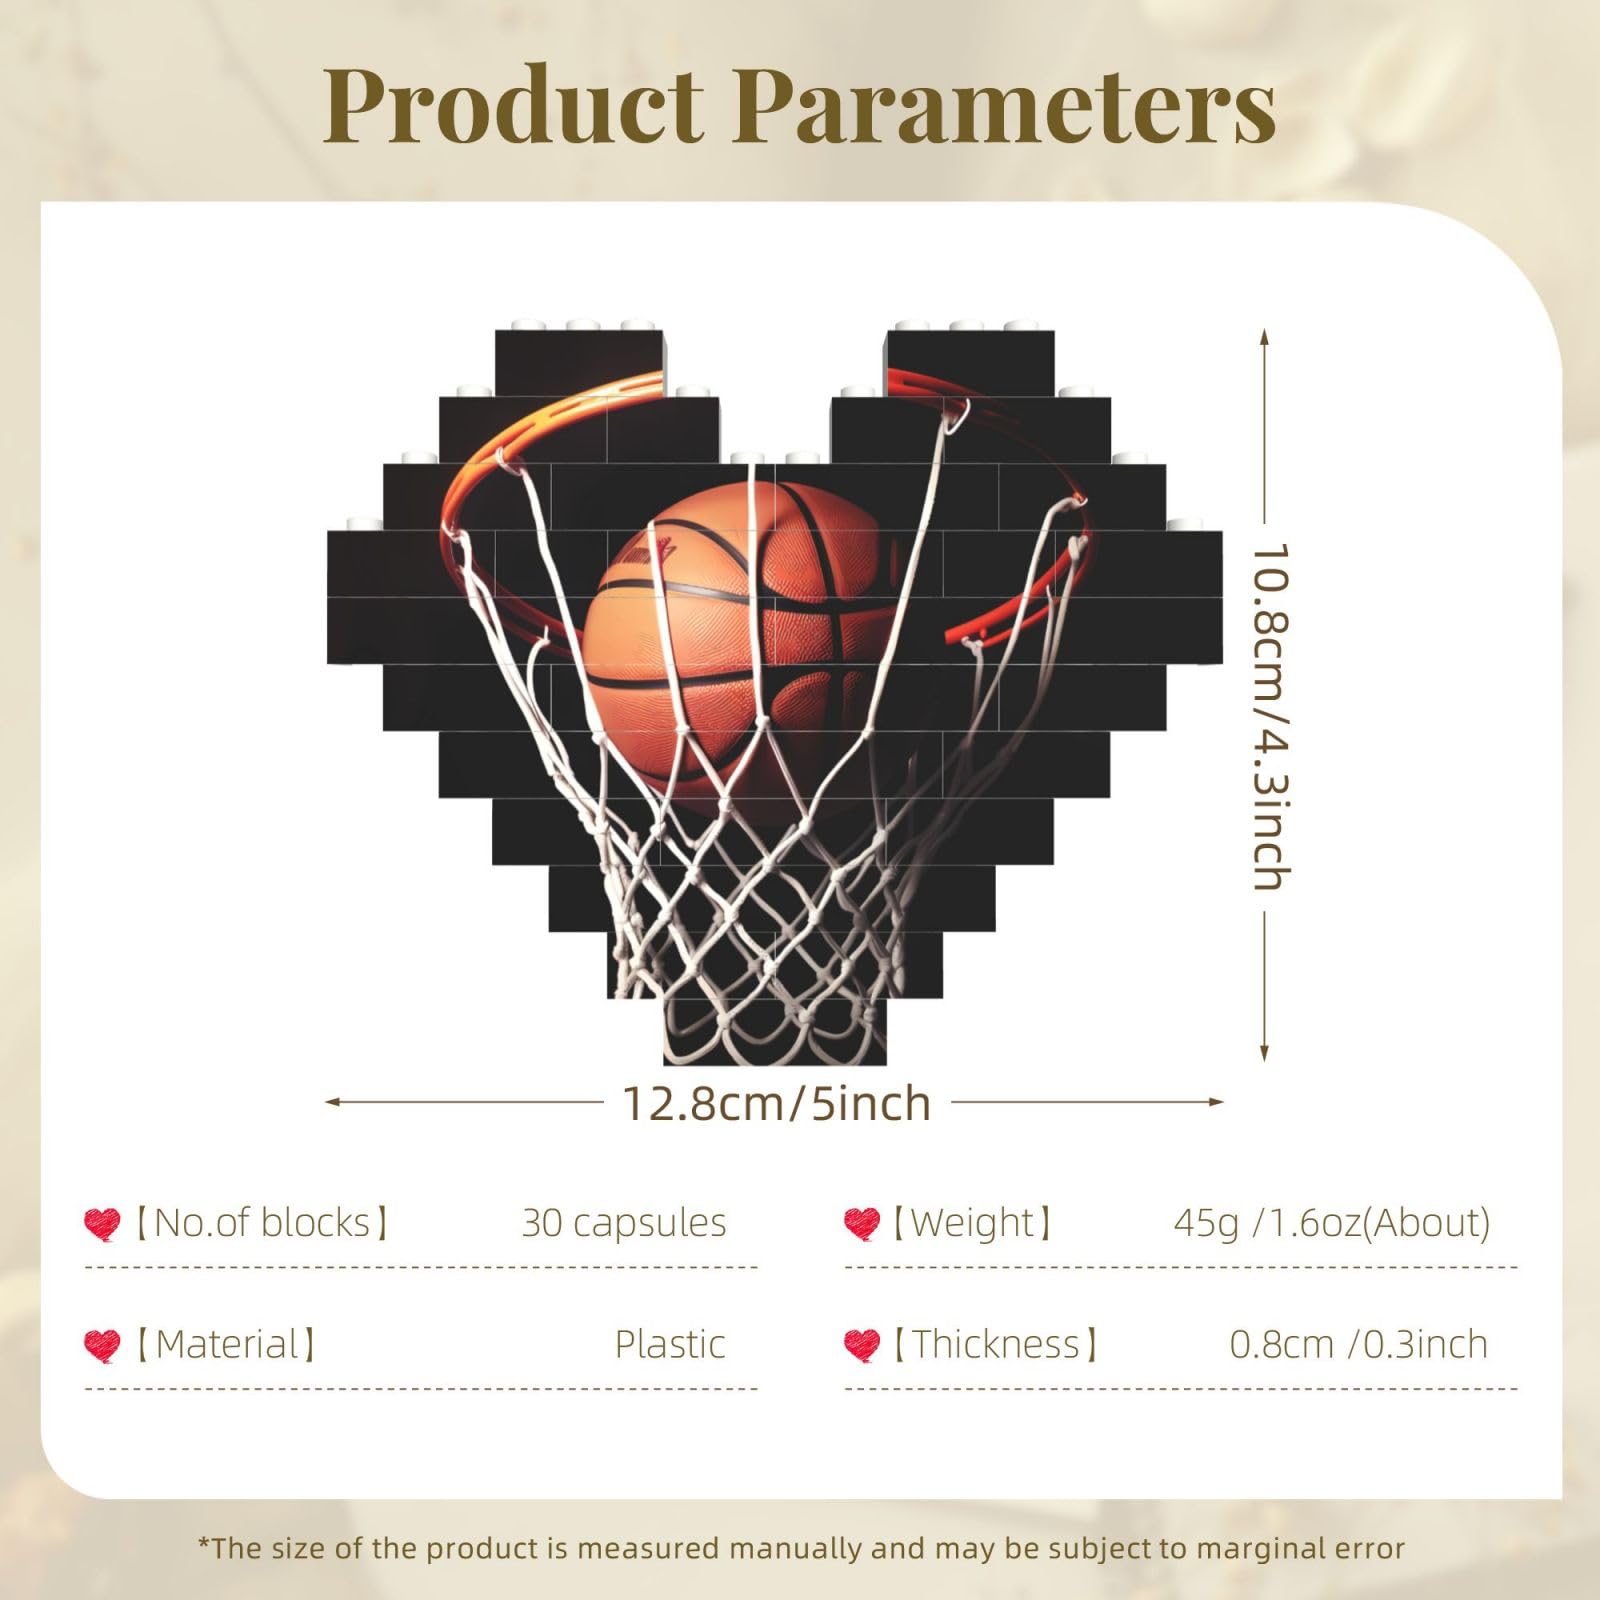 Building Block Puzzle Heart Shaped Building Bricks Basketball Puzzles Block Puzzle for Adults 3D Micro Building Blocks for Home Decor Bricks Set